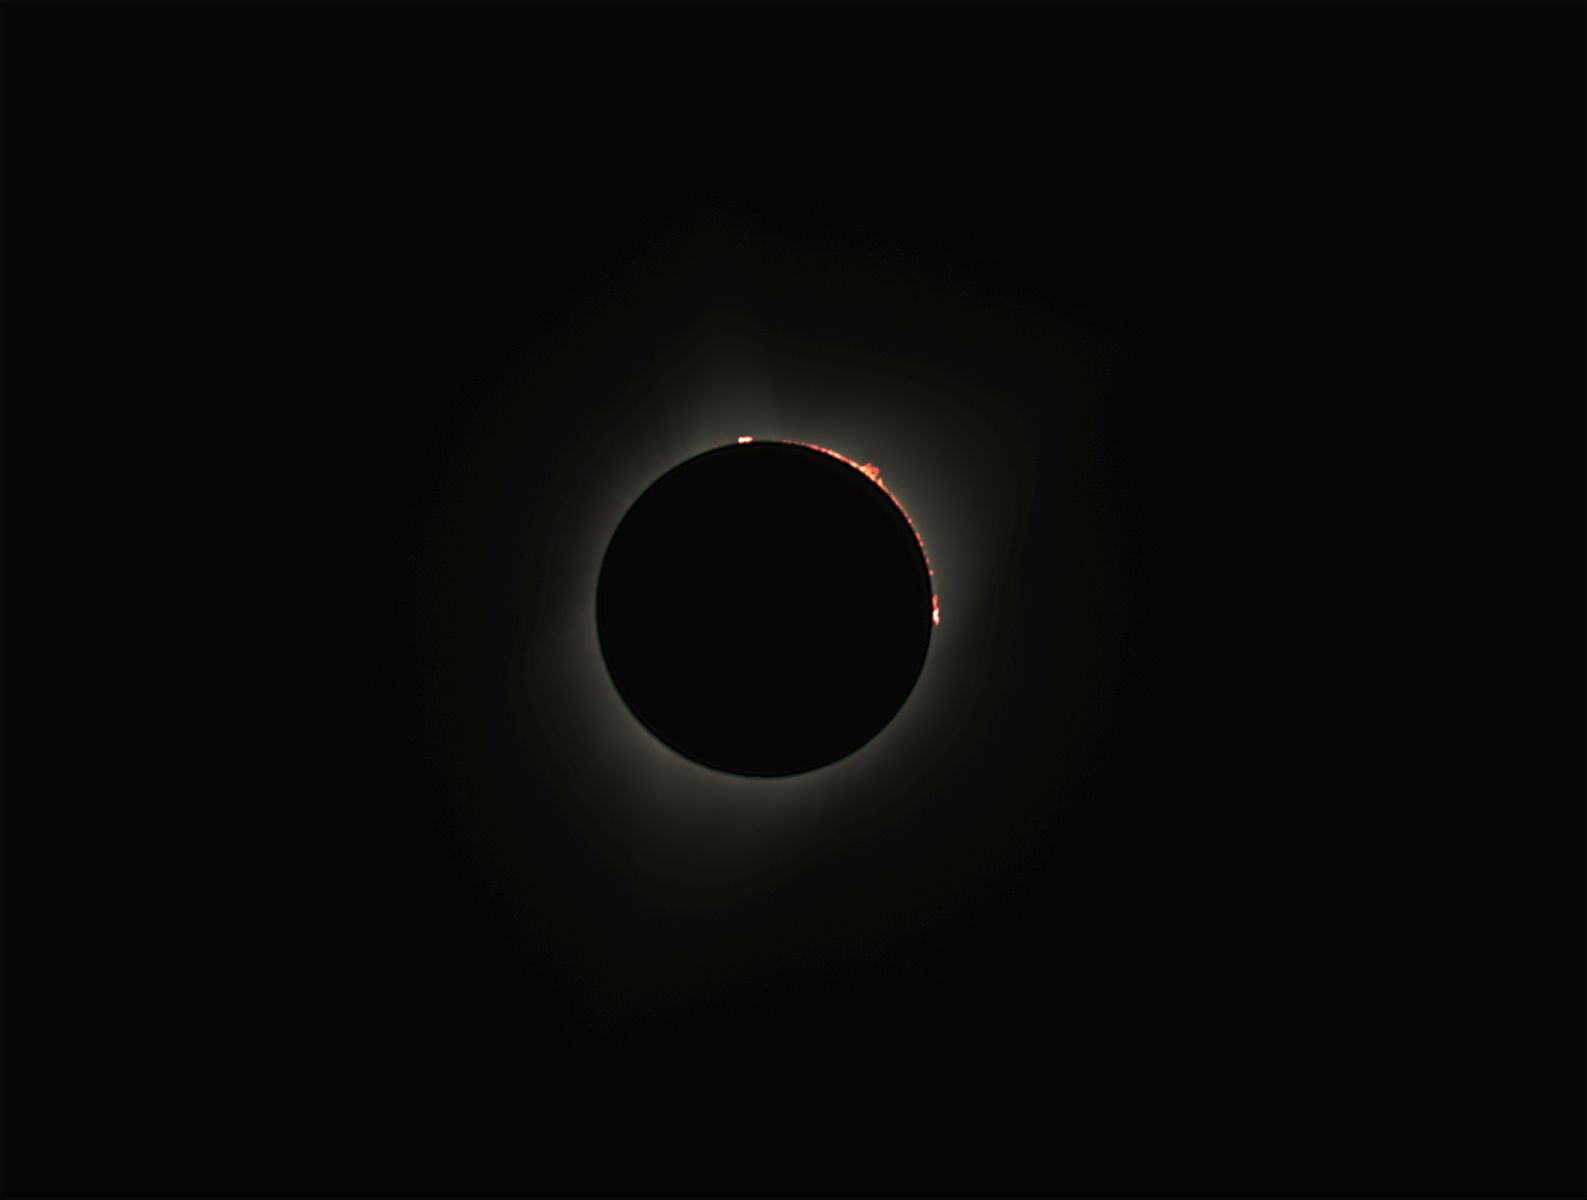 2017 Eclipse - Photo Gallery - Cloudy Nights